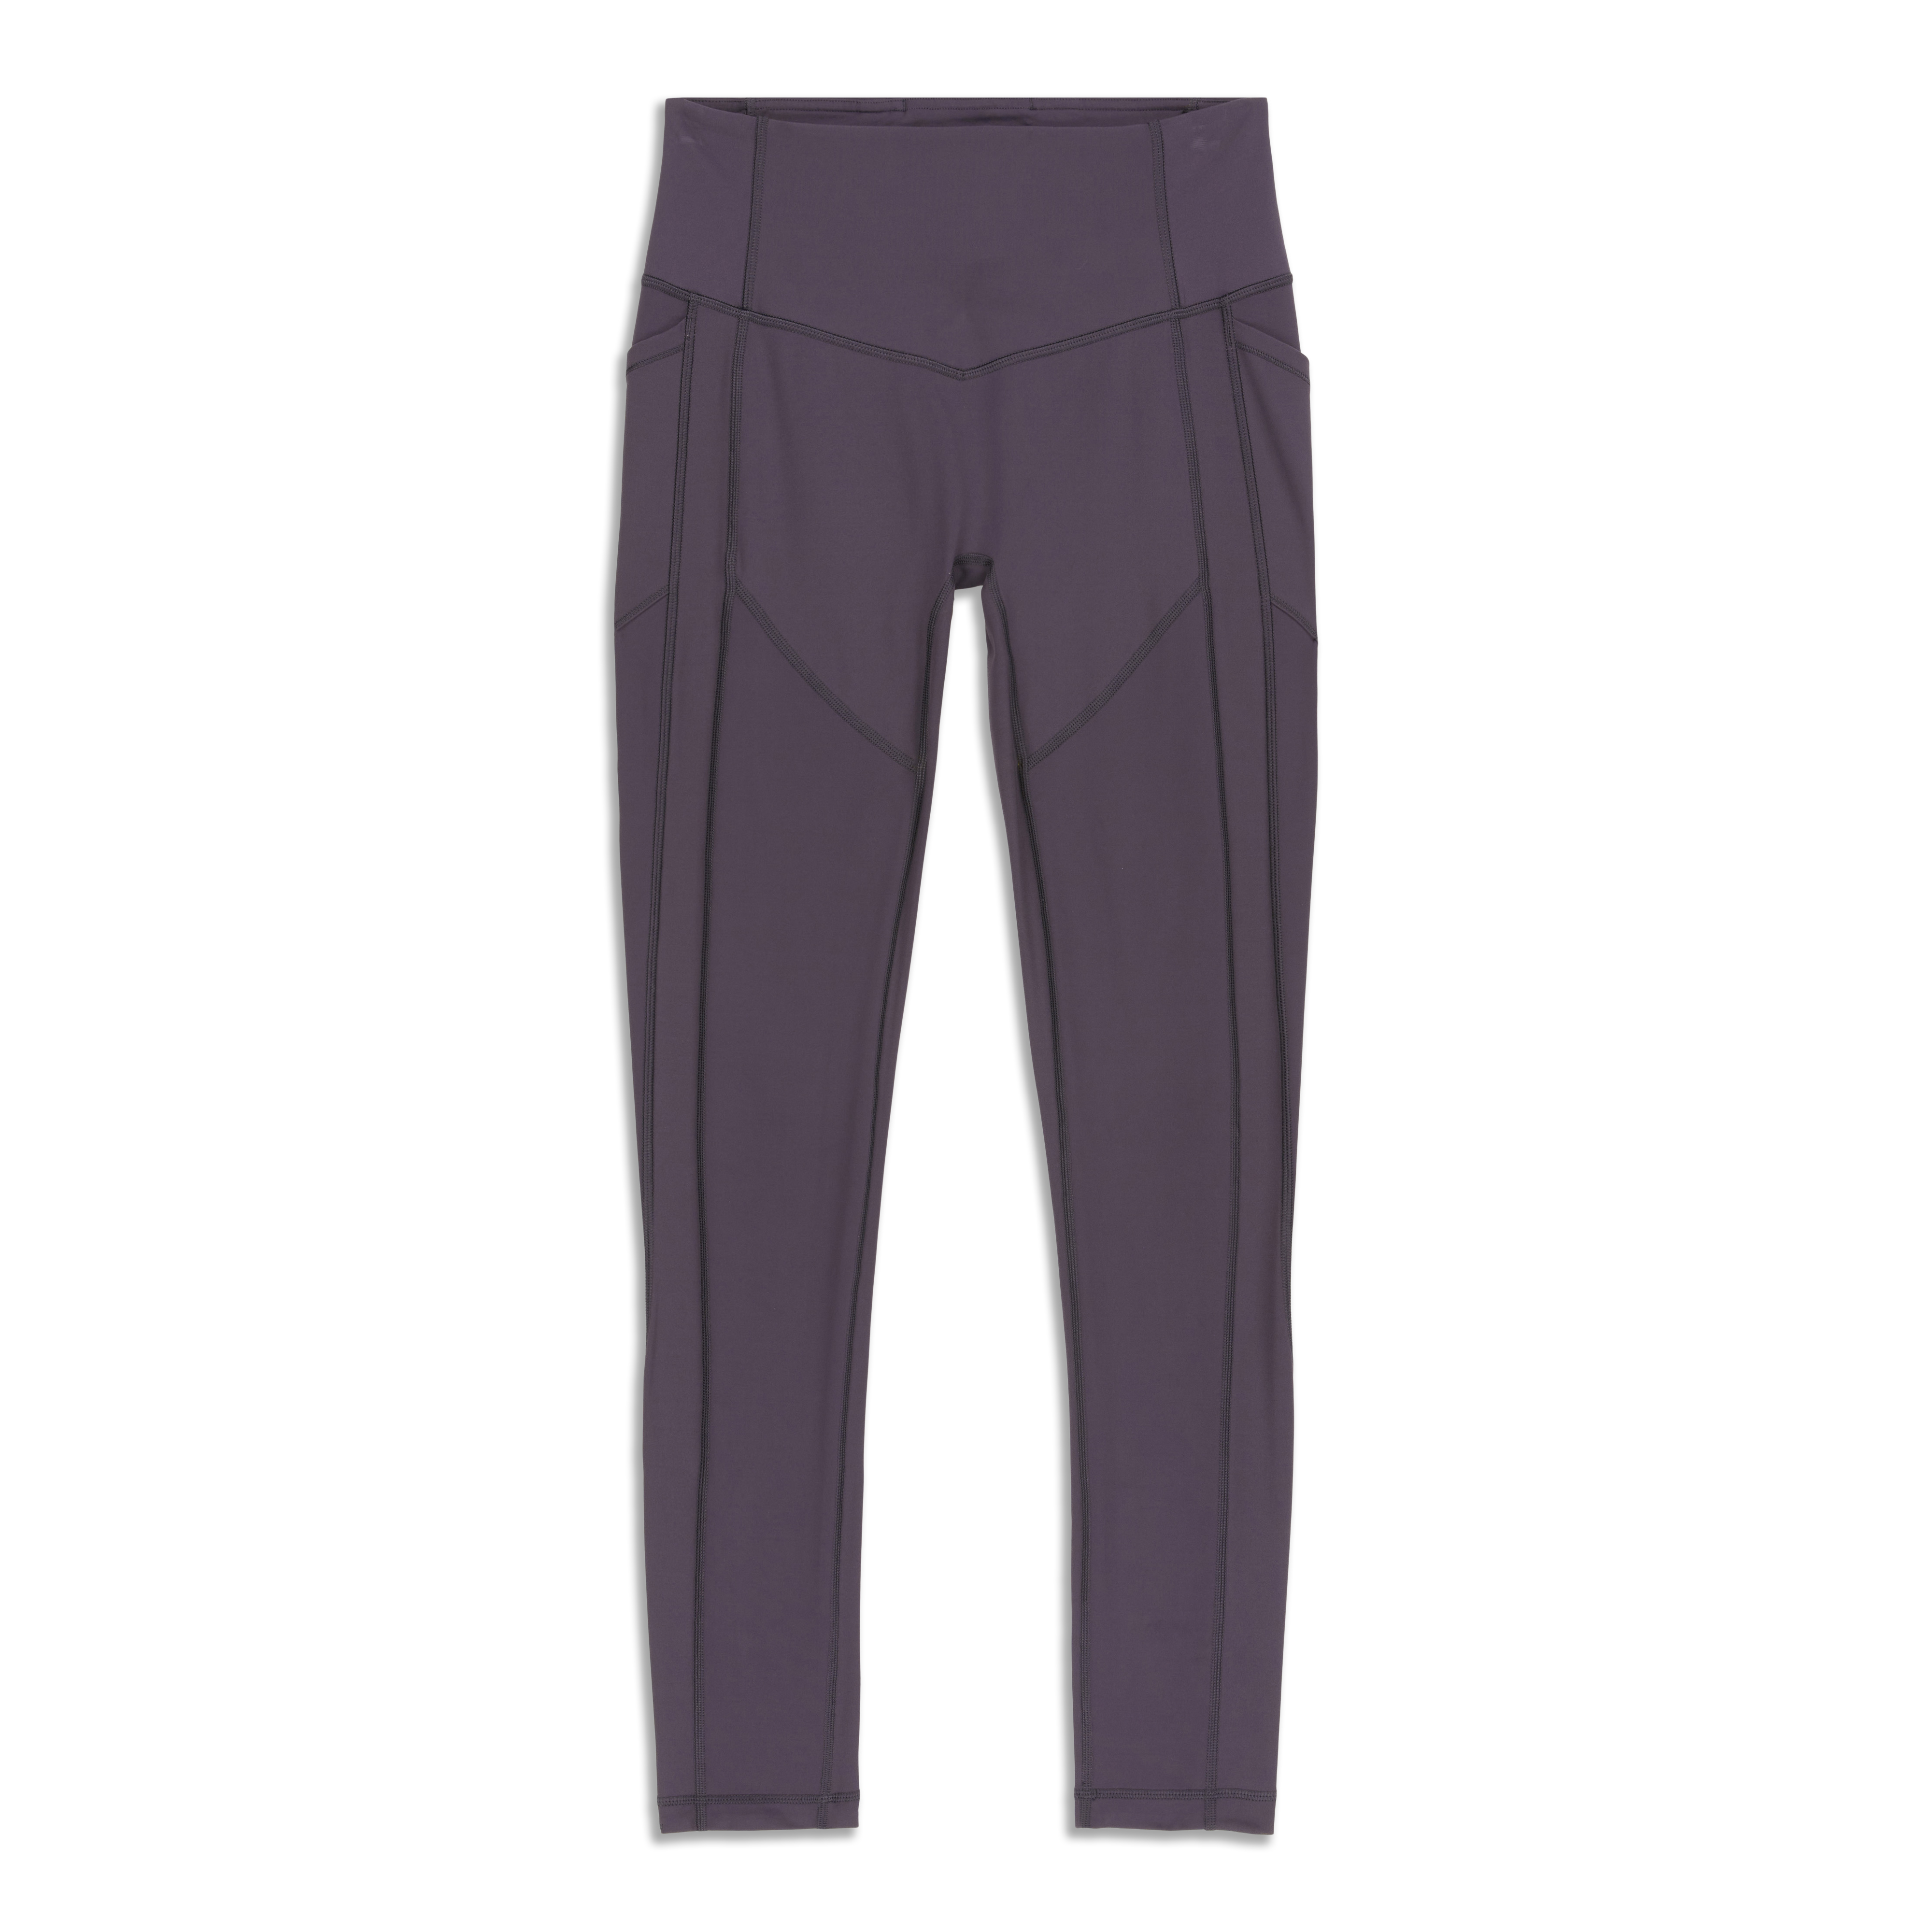 NWOT - Lululemon All The Right Places Pant II *28 Sage, SIZE: 6, 10